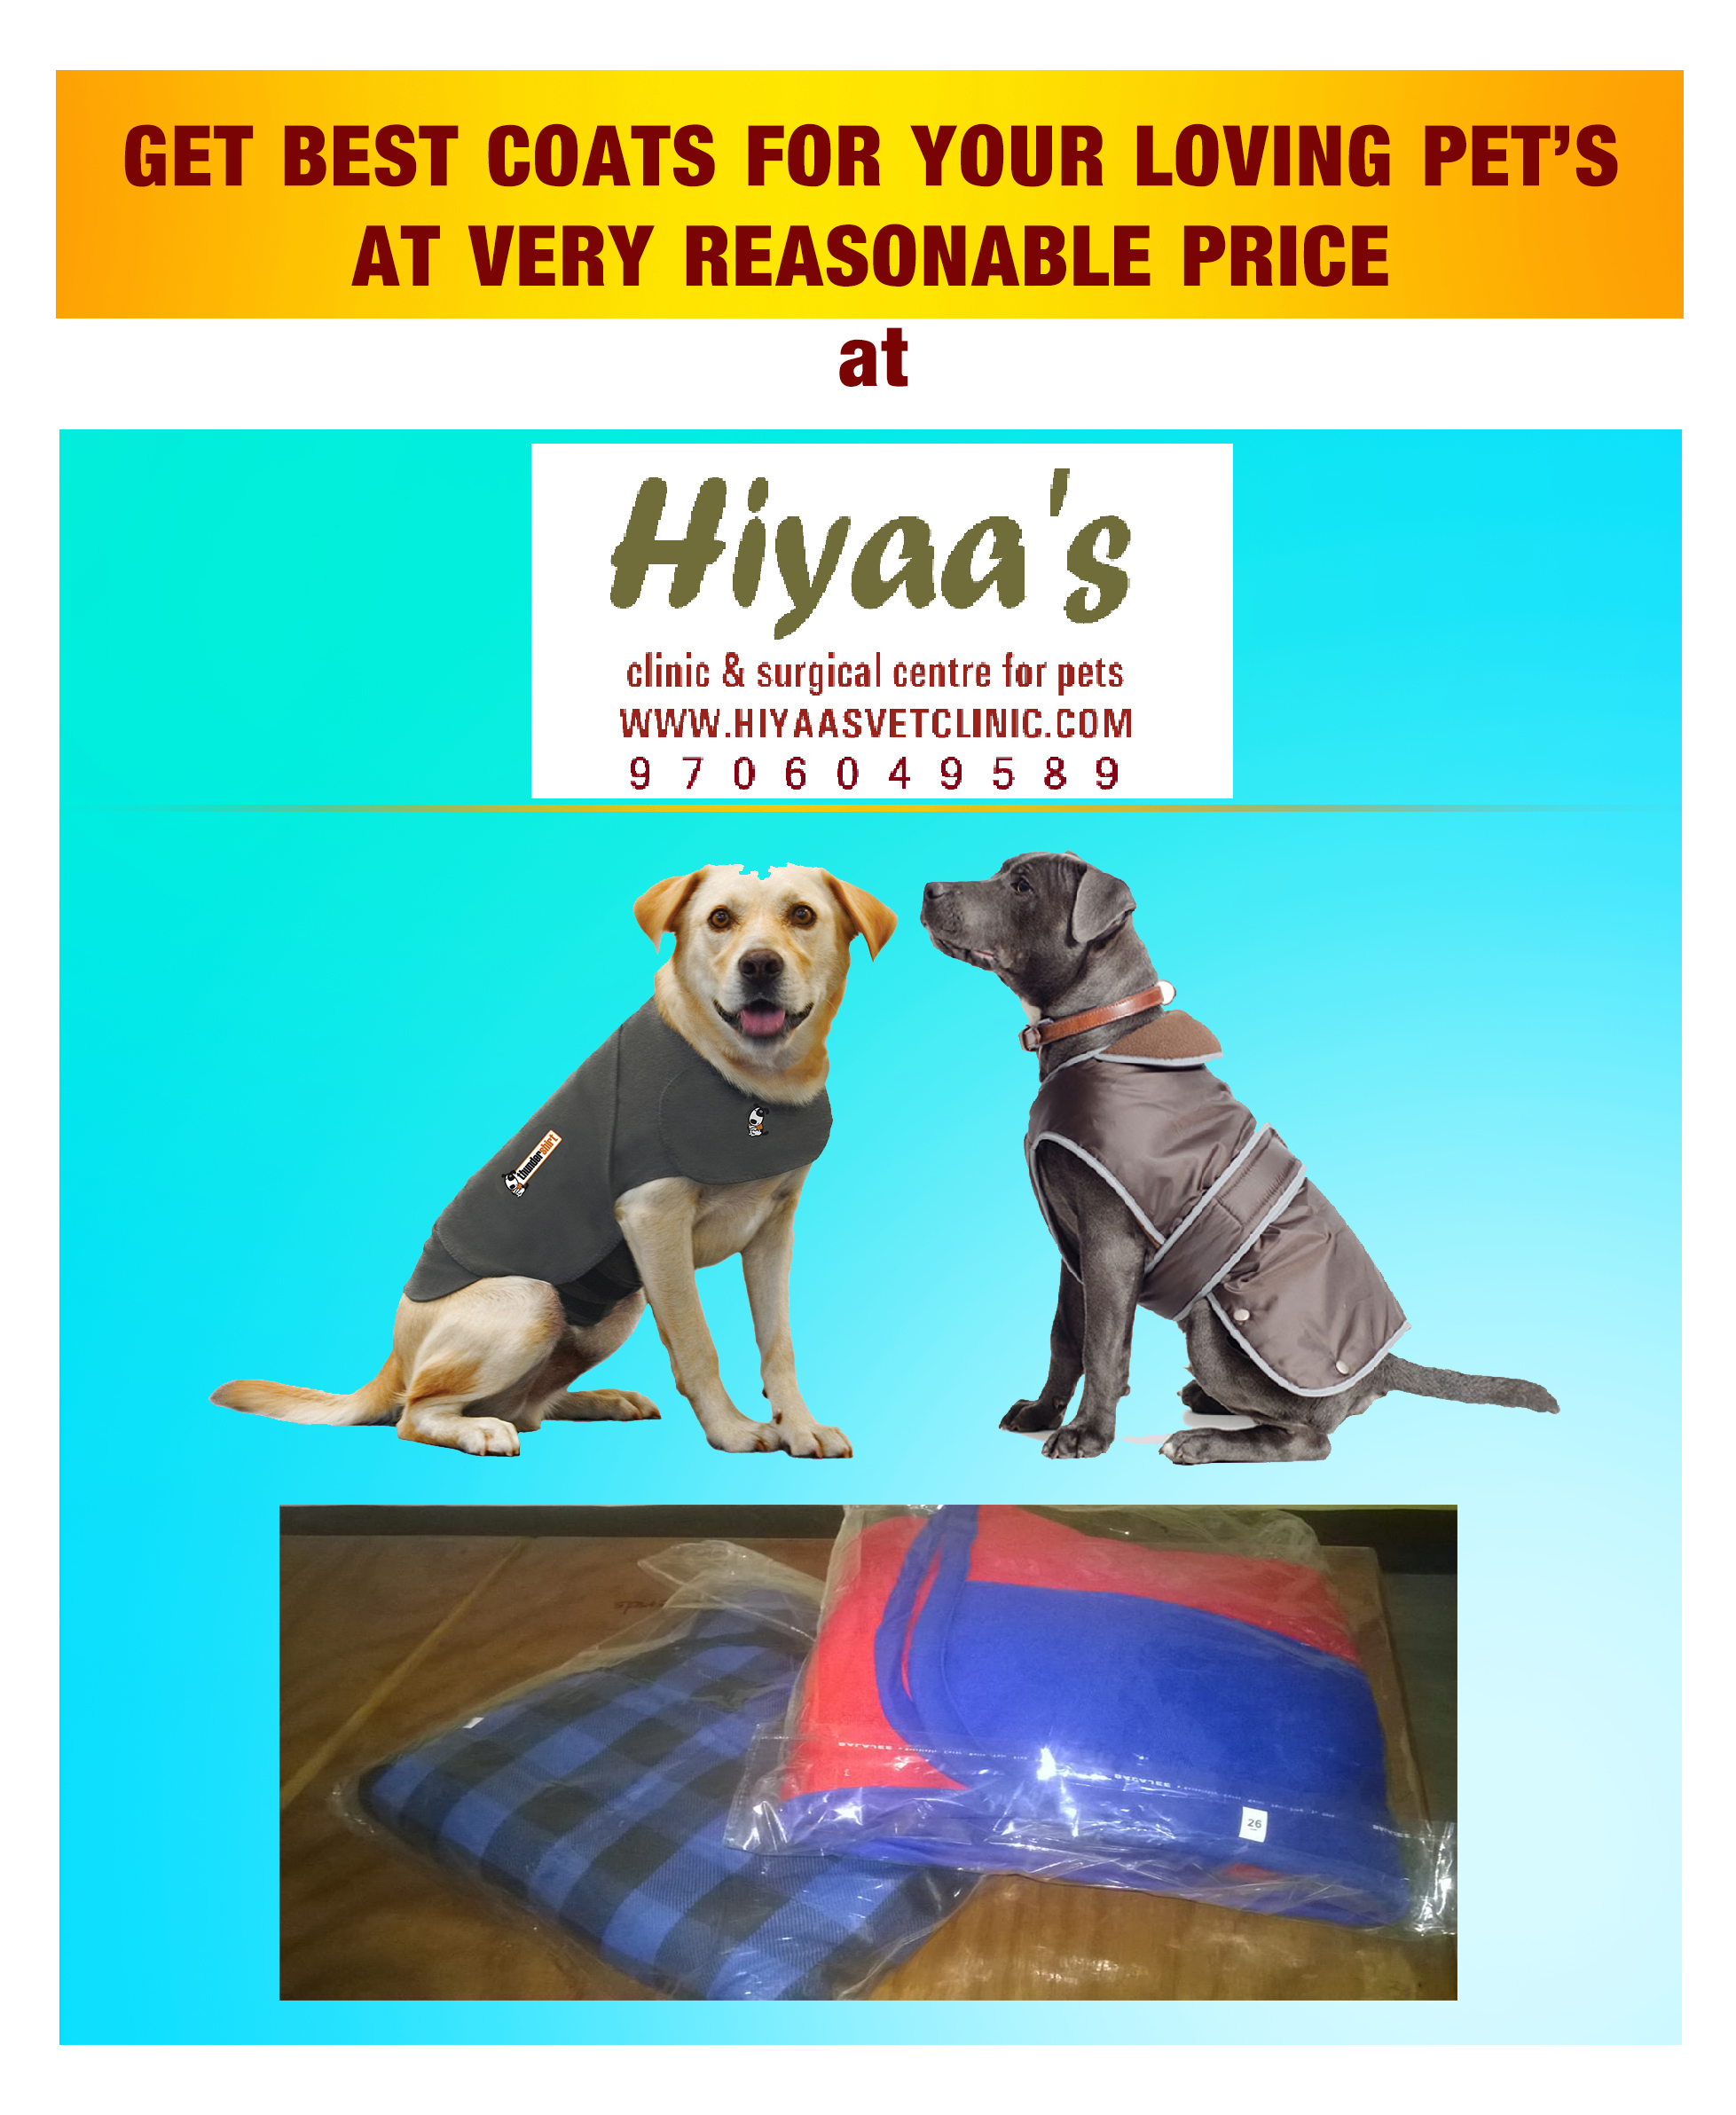 Best of coats for your pet at Hiyaa’s clinic: Get them one today!